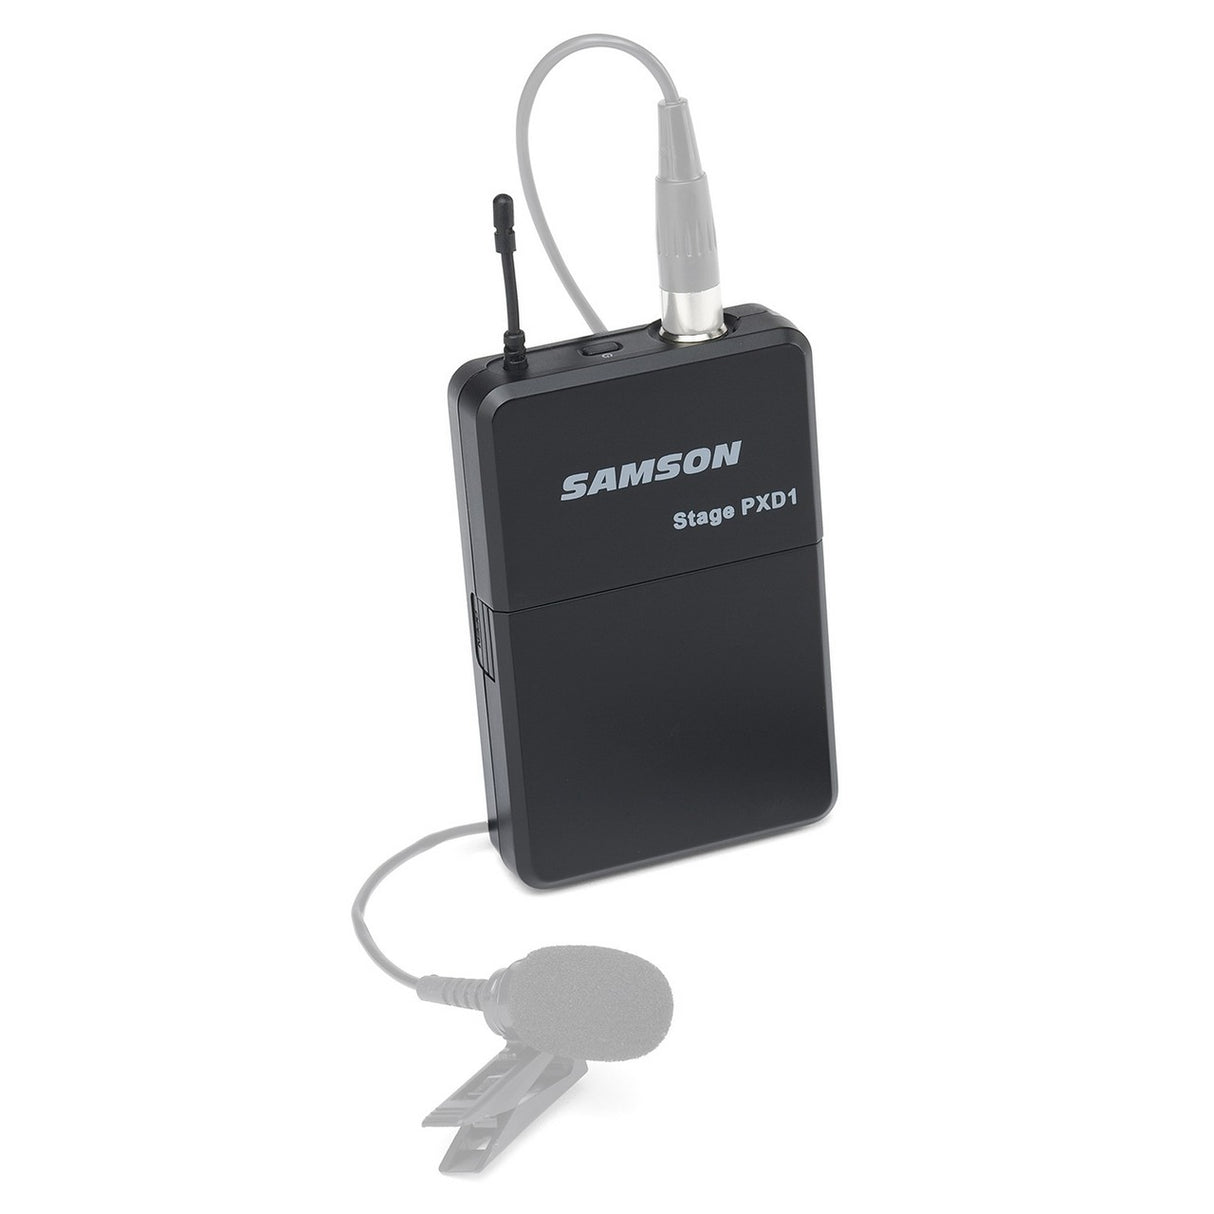 Samson PXD1 Beltpack Transmitter for XPD1 Headset and Lavalier Wireless System